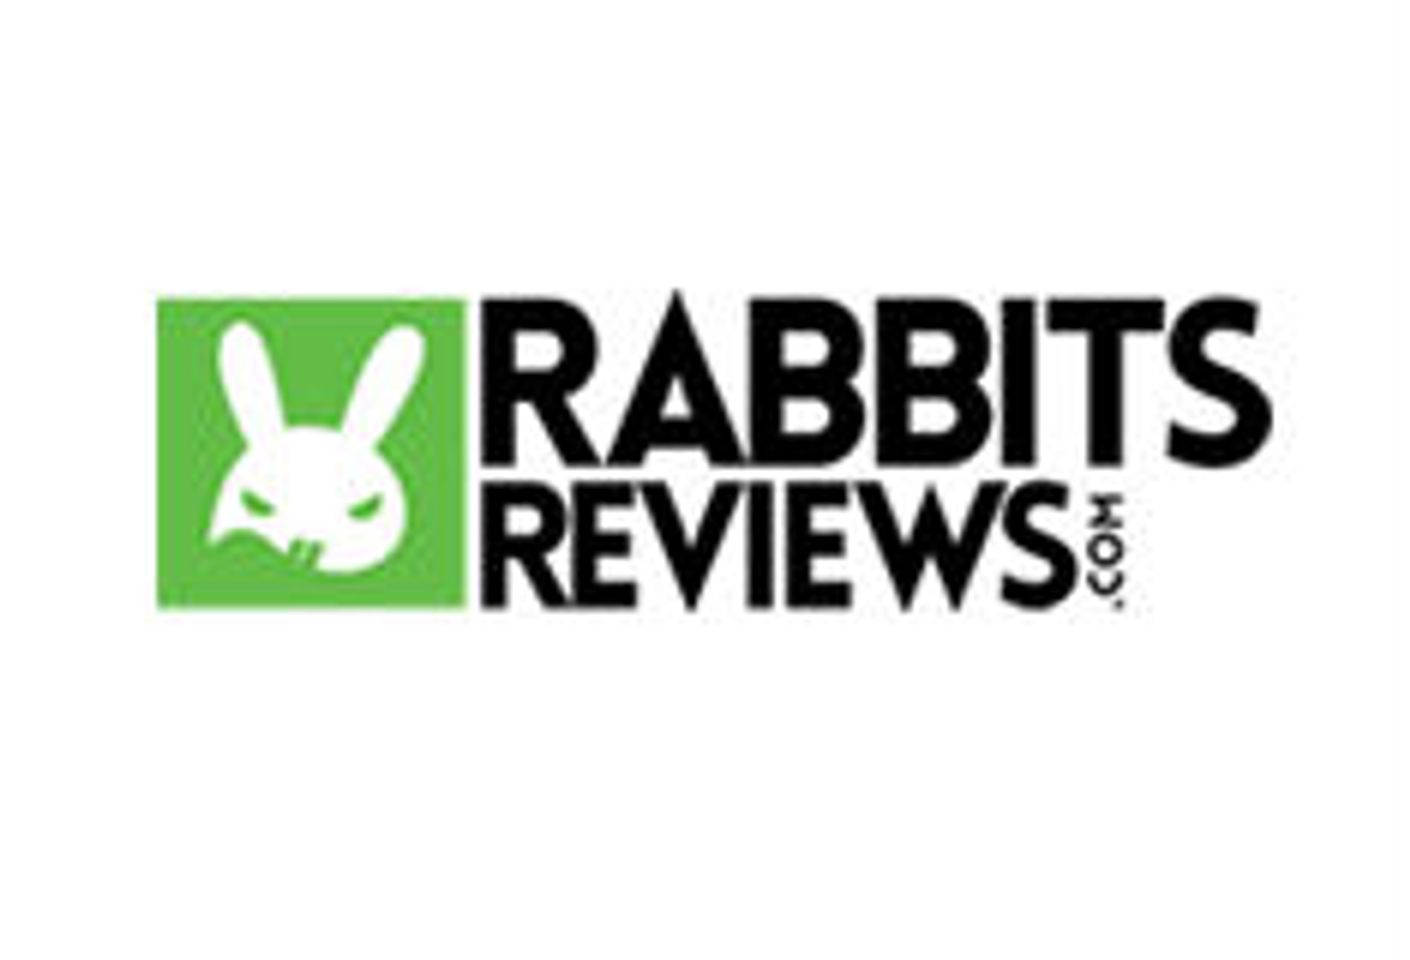 RabbitsReviews Revamps Rabbit and Much More